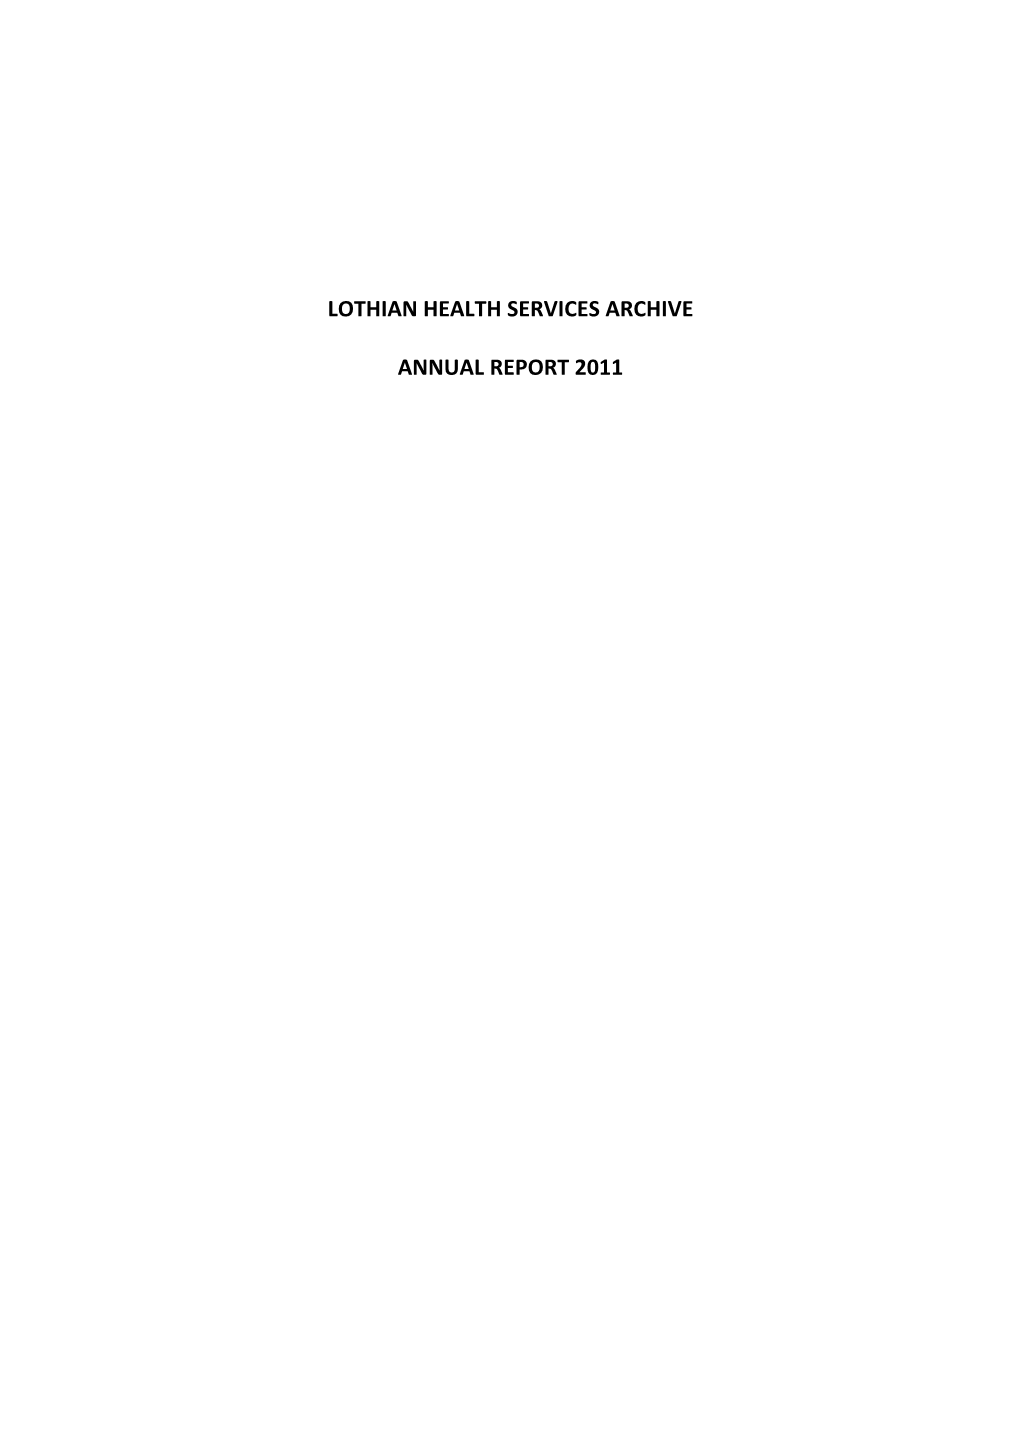 Lothian Health Services Archive Annual Report 2011